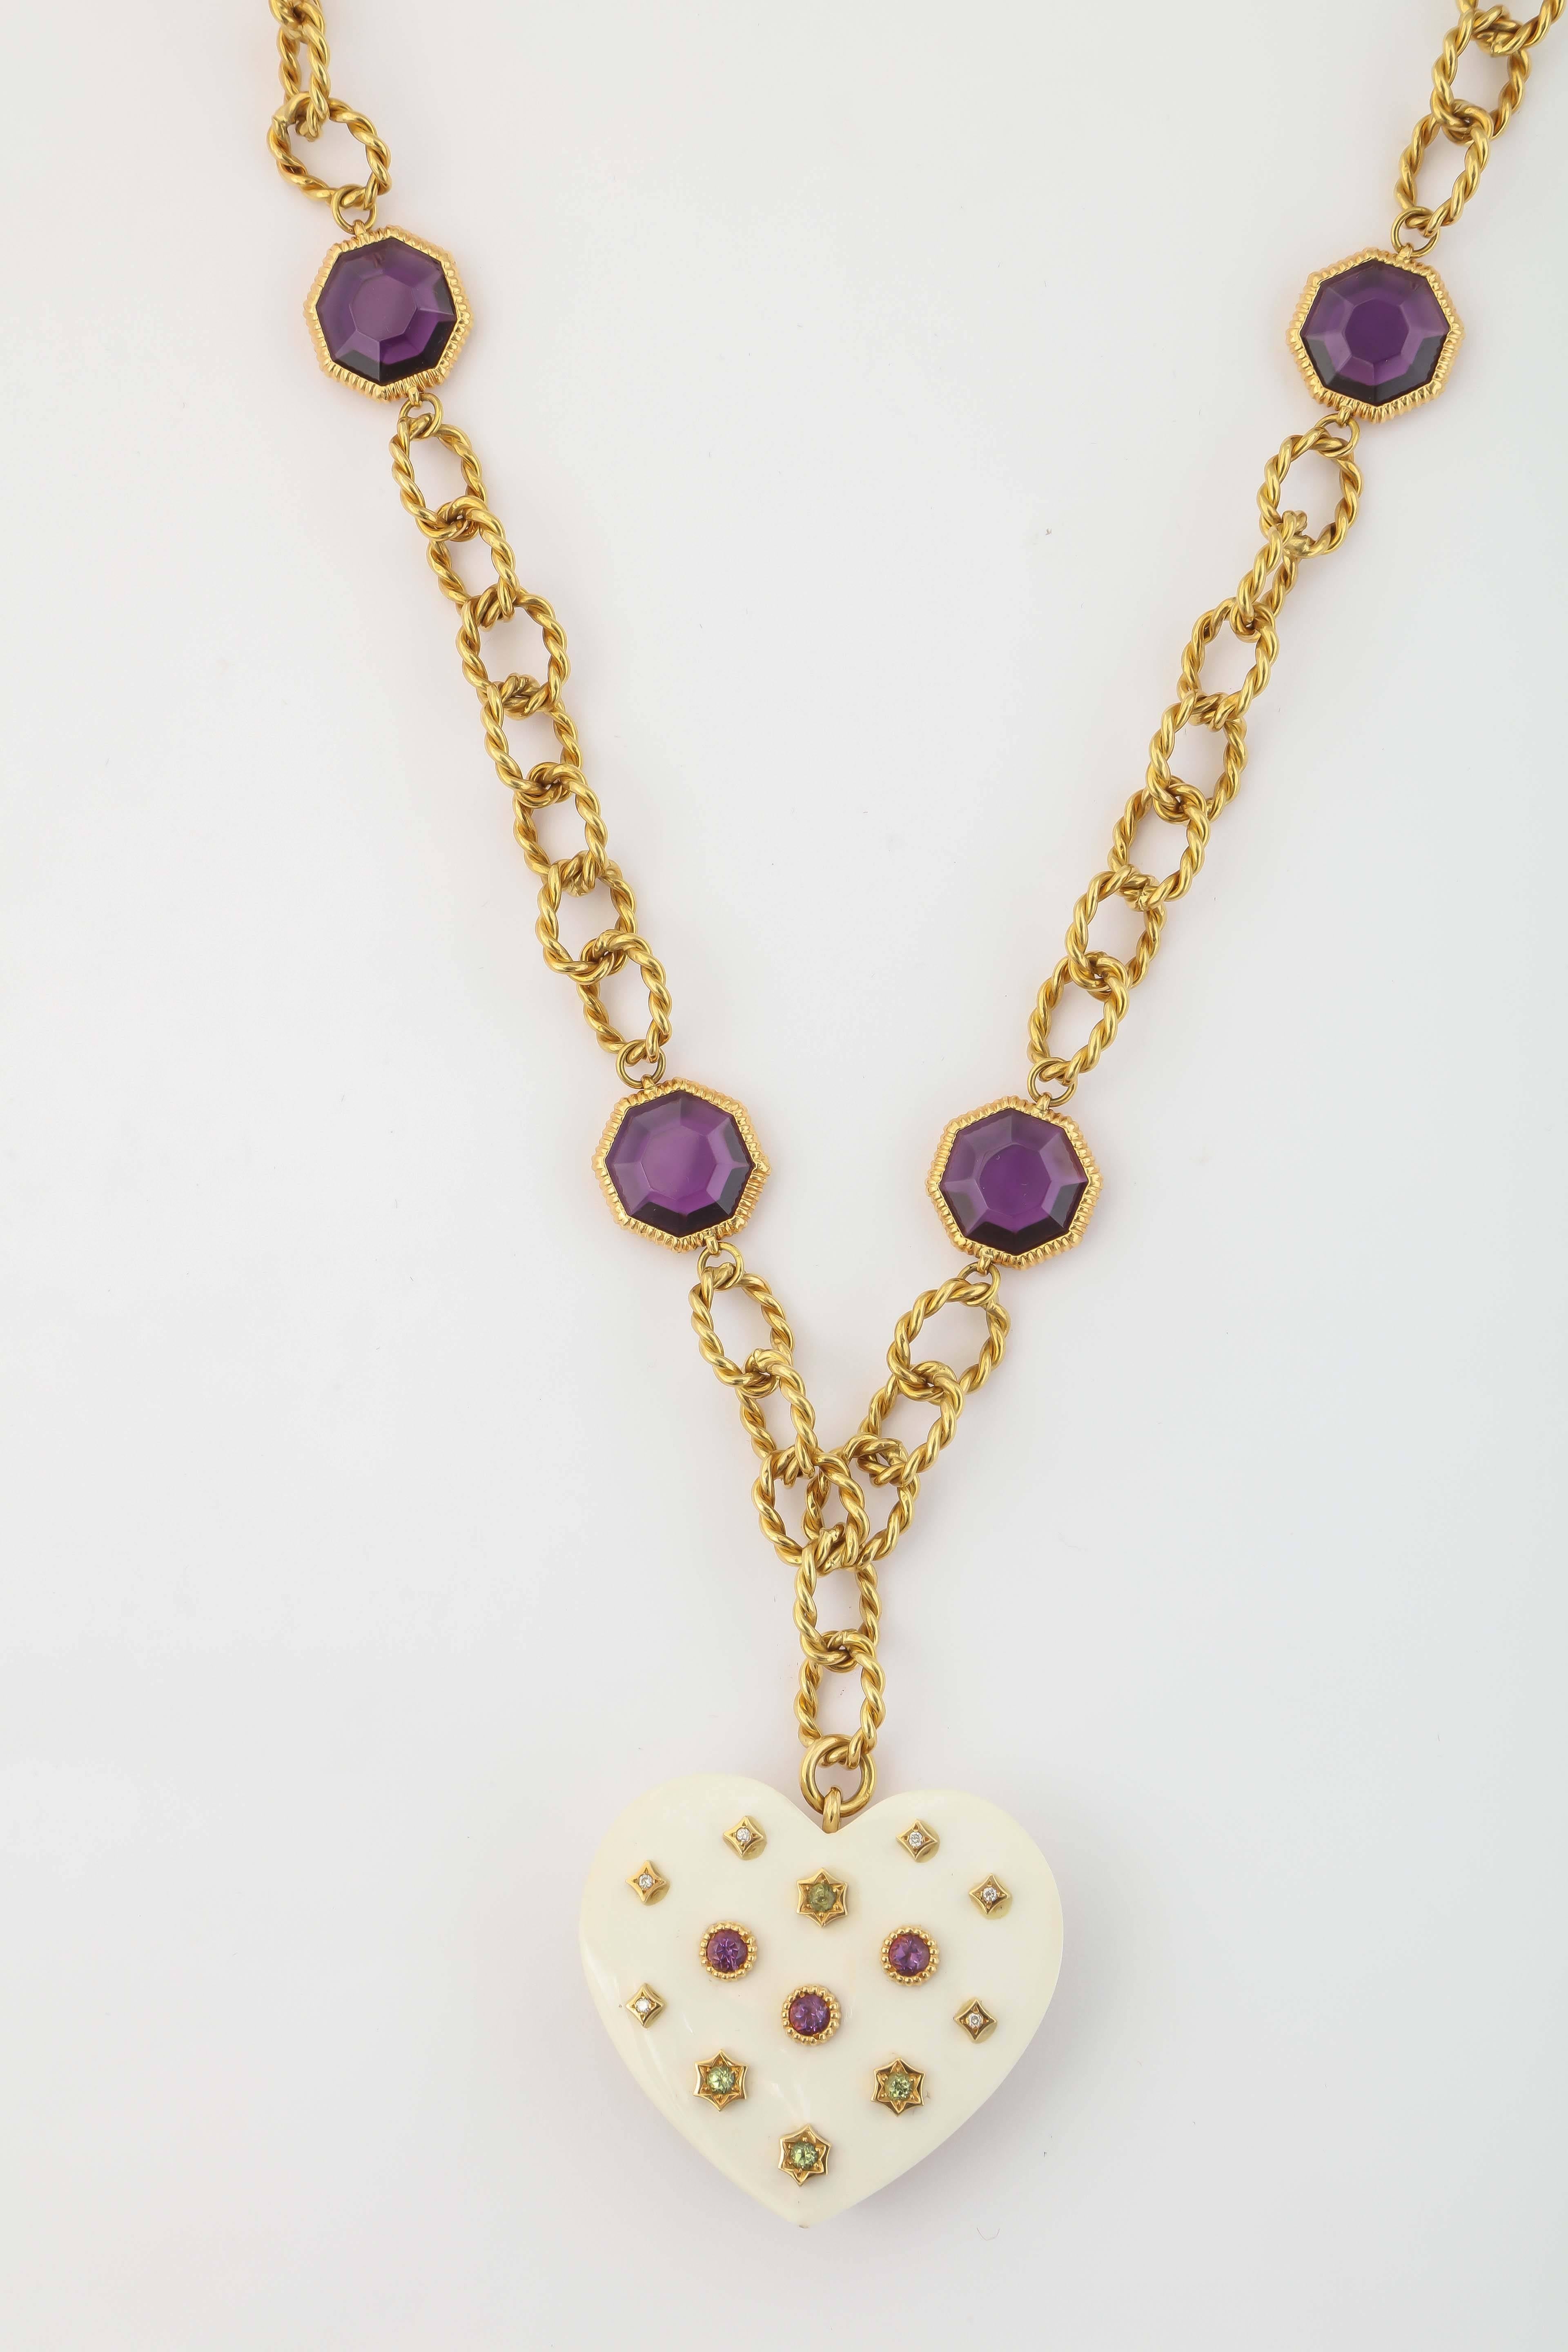 1960s White Ceramic Amethyst Peridot Diamond Gold Heart Necklace In Excellent Condition For Sale In New York, NY